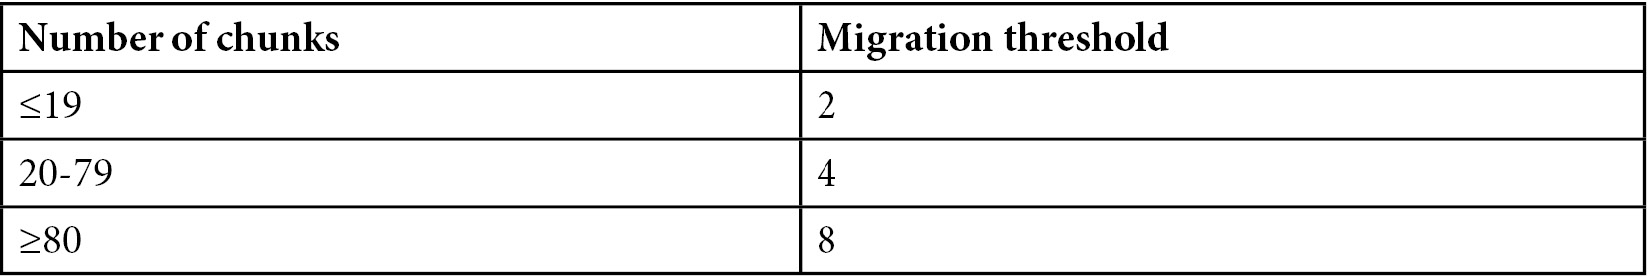 Table 14.1: Sharding number of chunks in each shard and migration threshold
